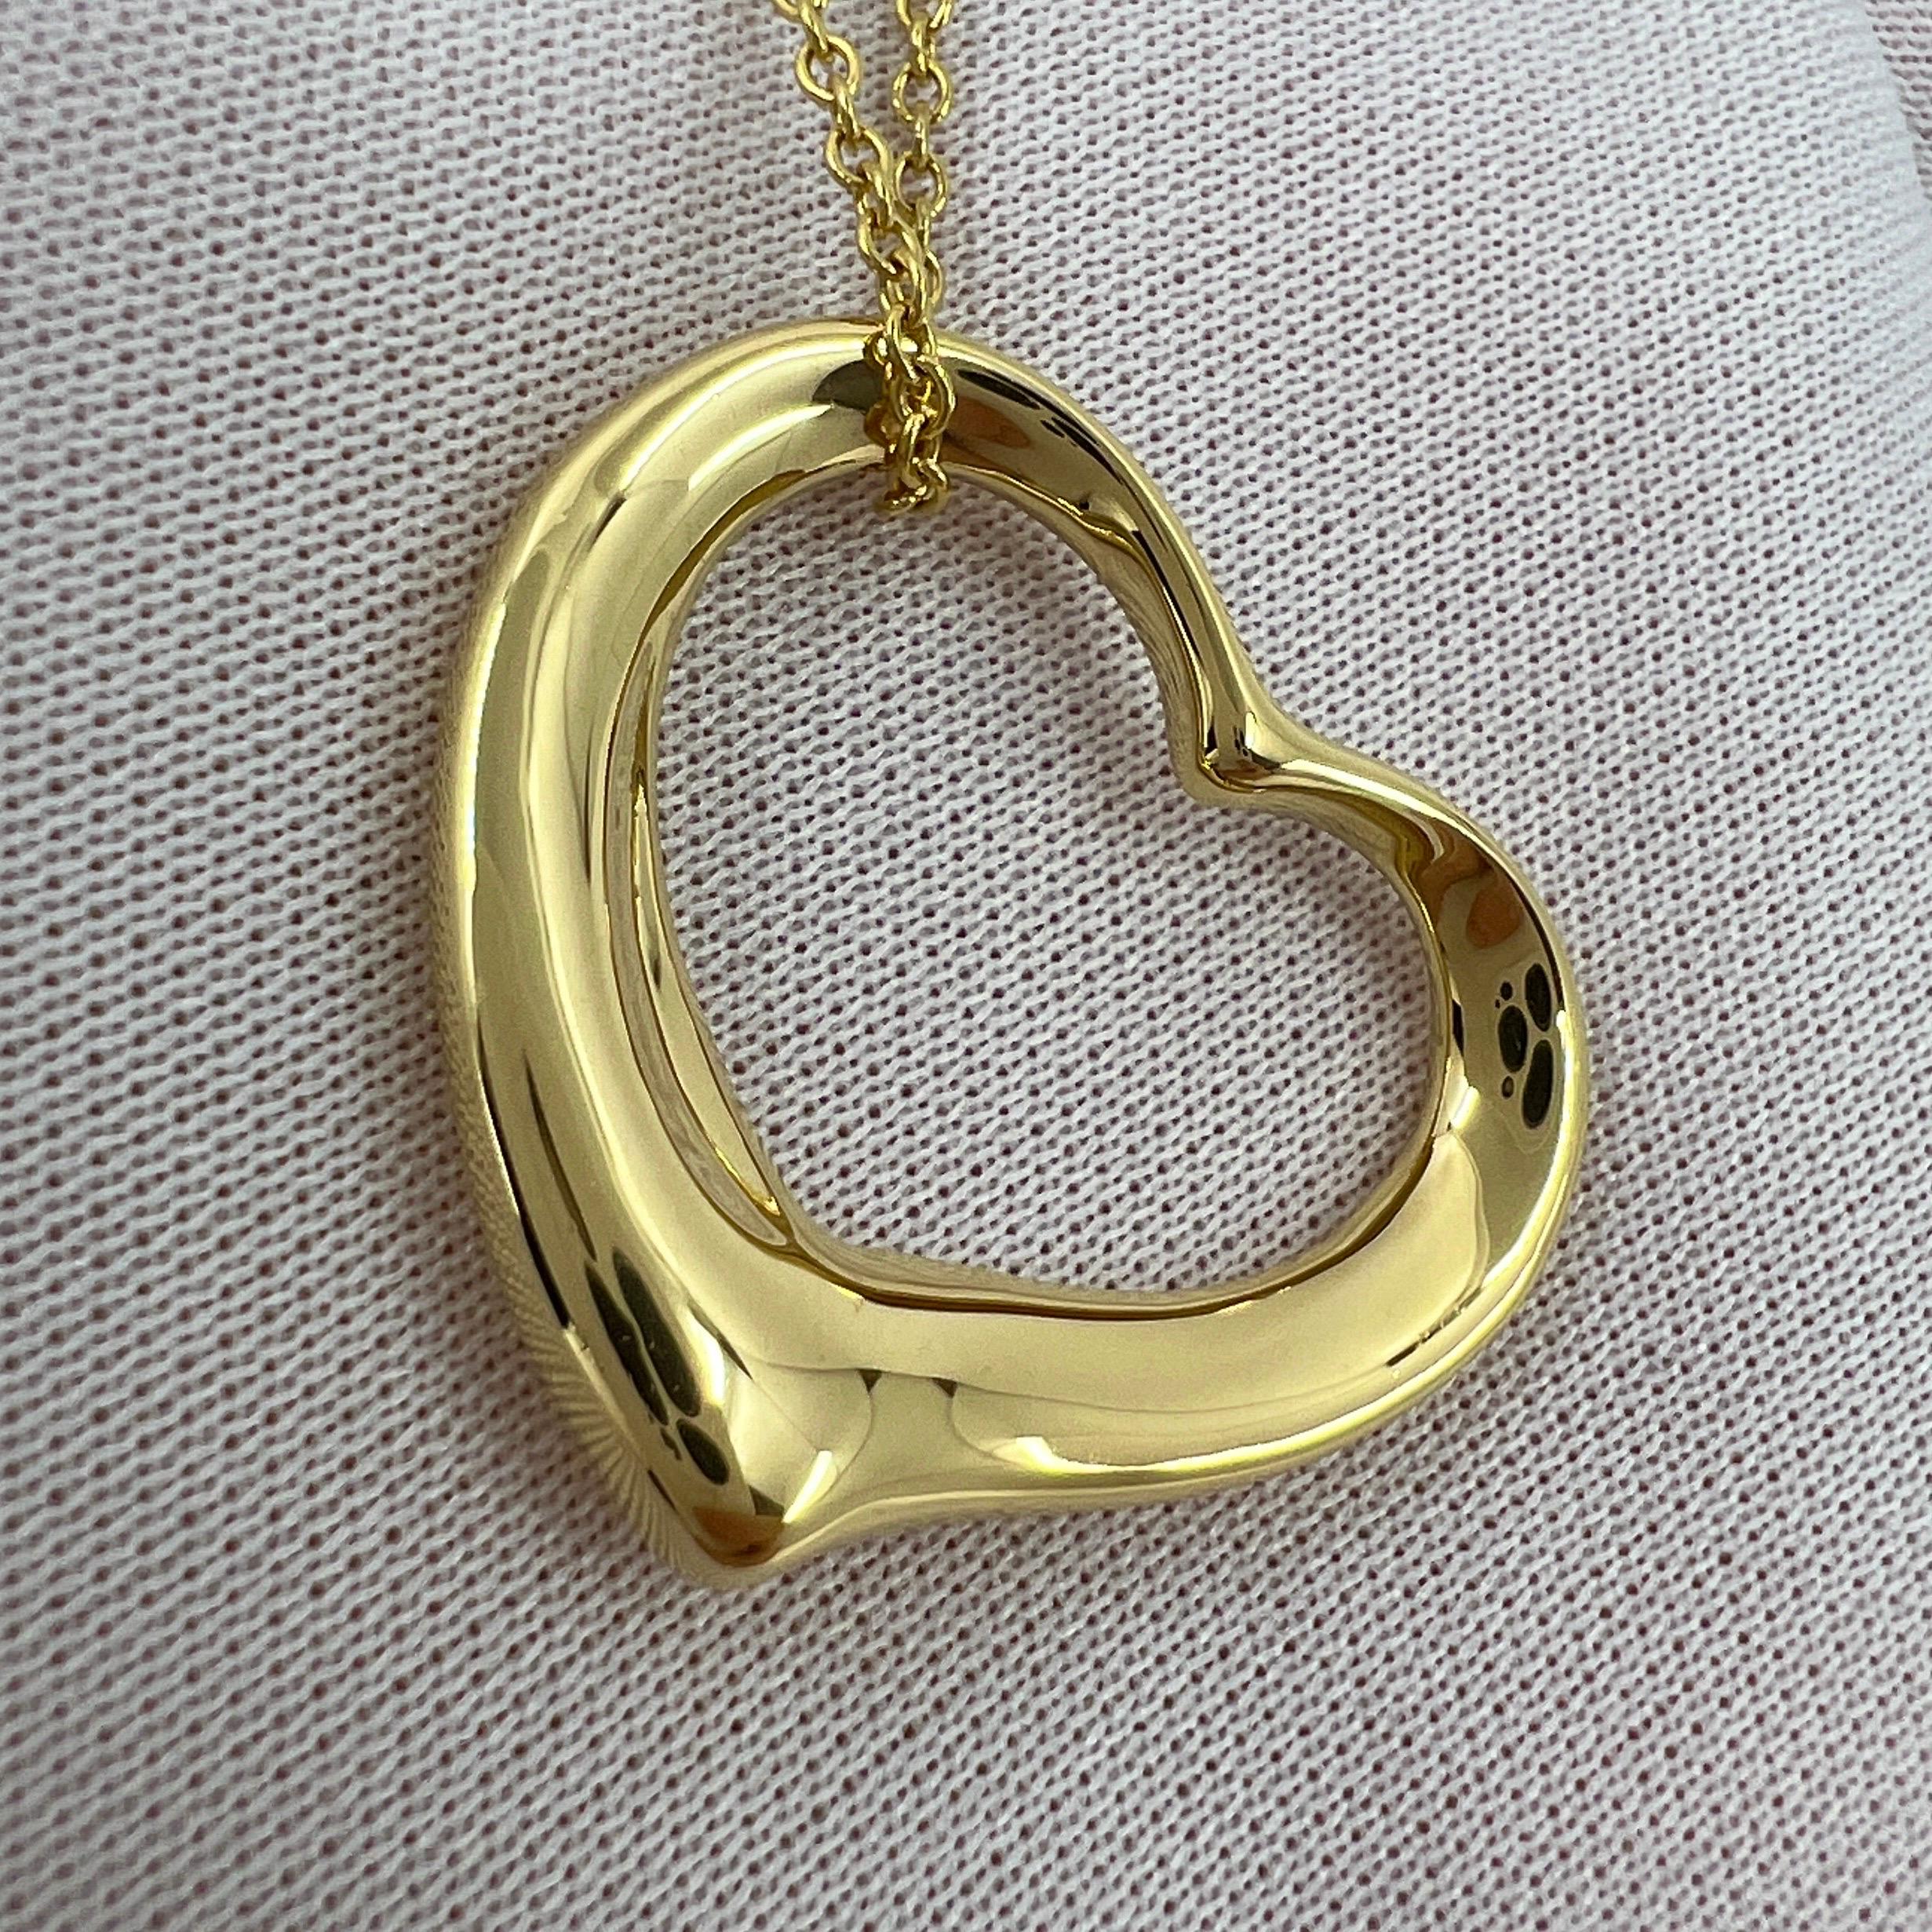 Women's or Men's Tiffany & Co. Elsa Peretti Extra Large Open Heart 18k Gold Pendant Necklace For Sale